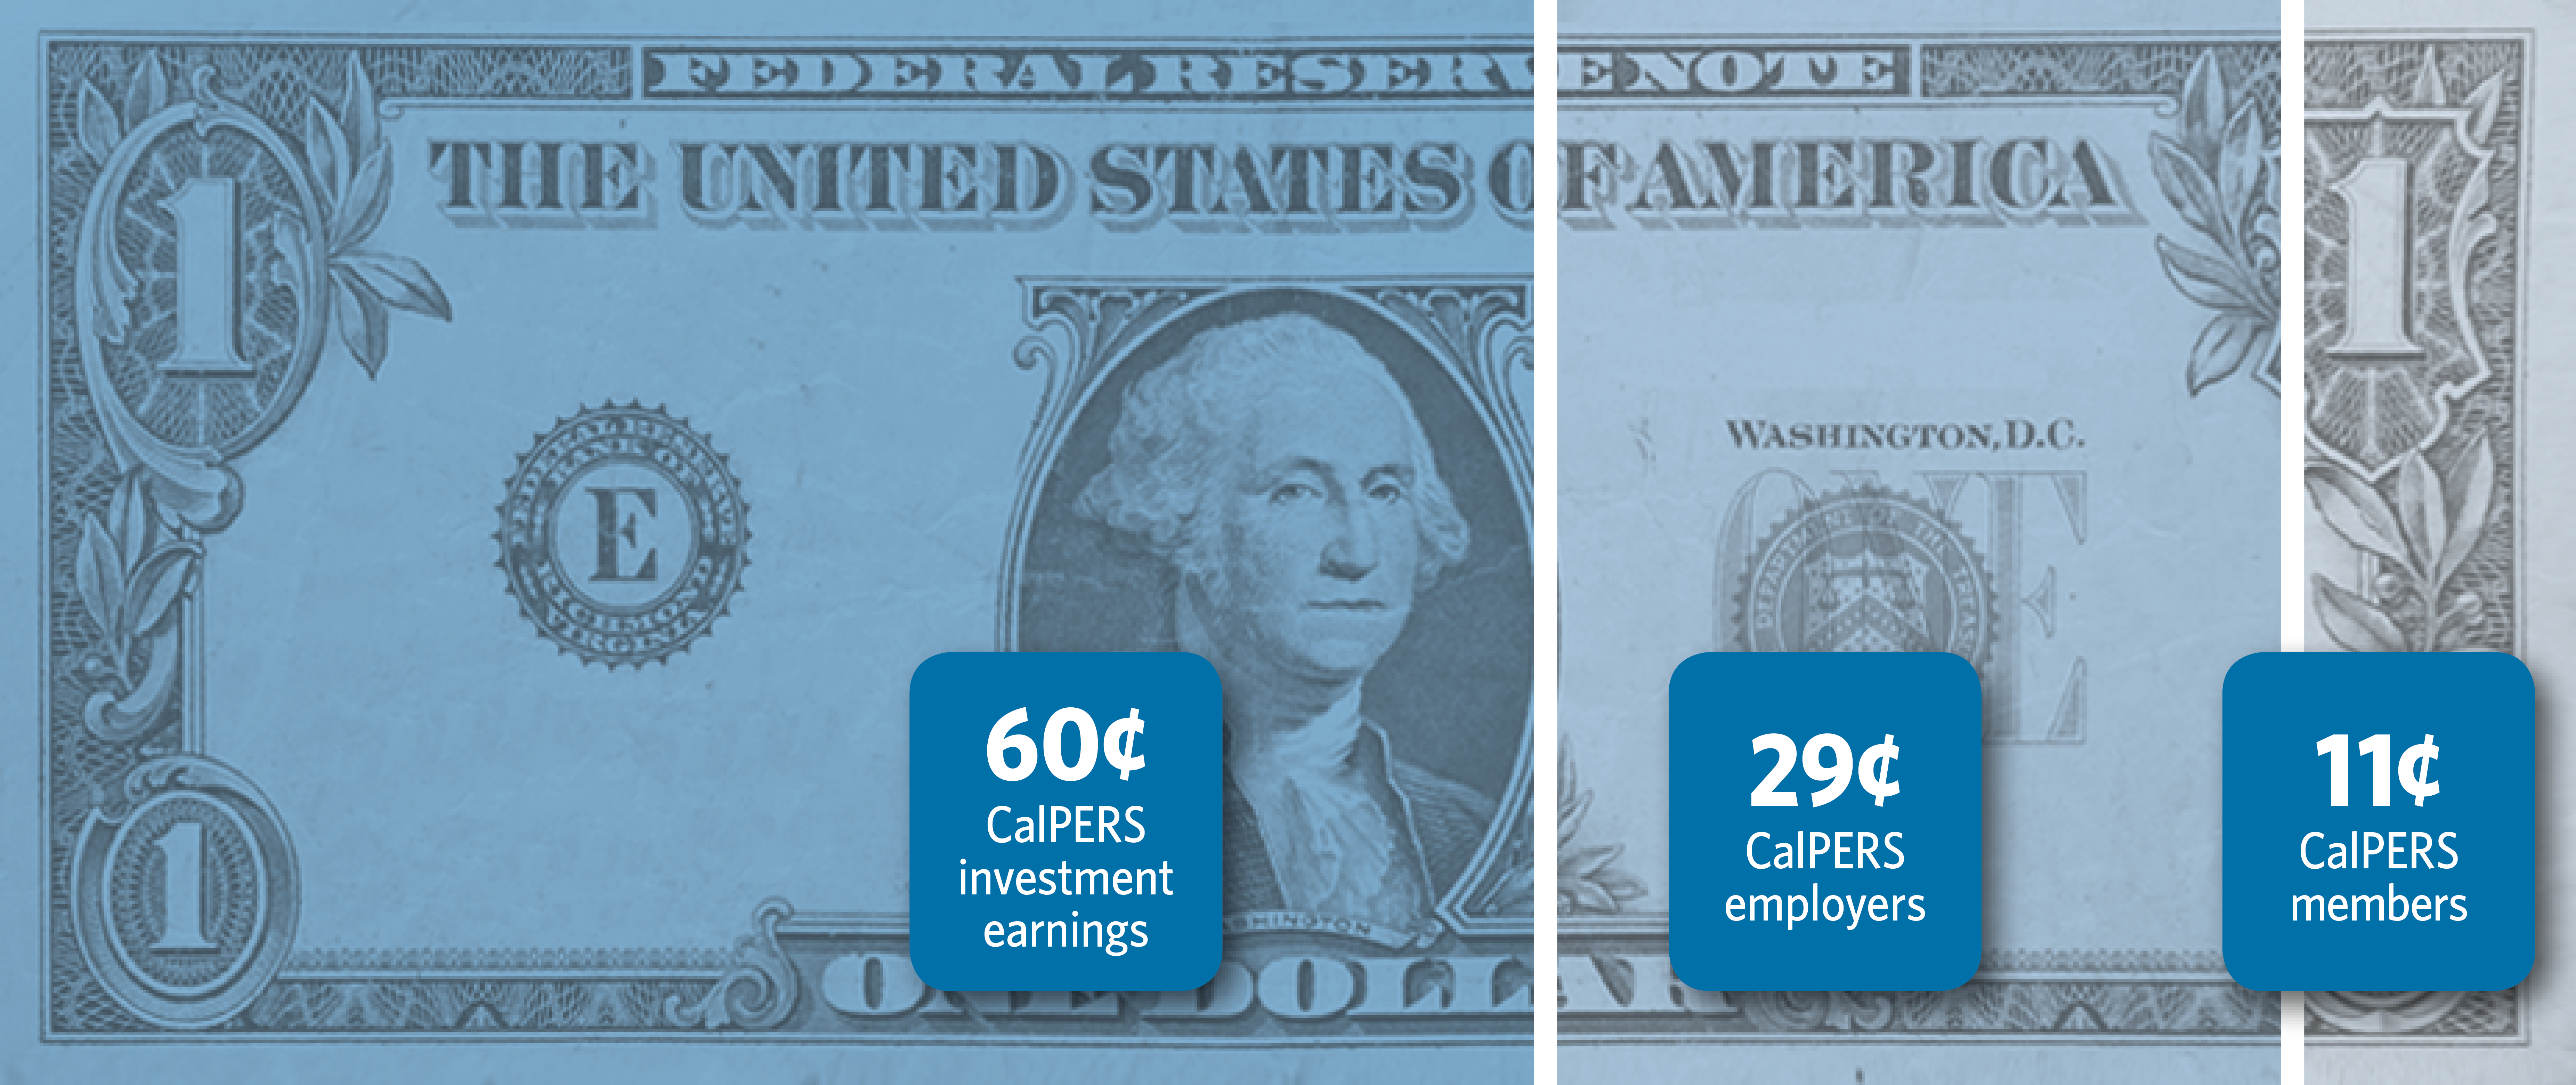 The CalPERS Pension Buck: 60 cents comes from CalPERS investment earnings, 29 cents comes from CalPERS employers, and 11 cents comes from CalPERS members